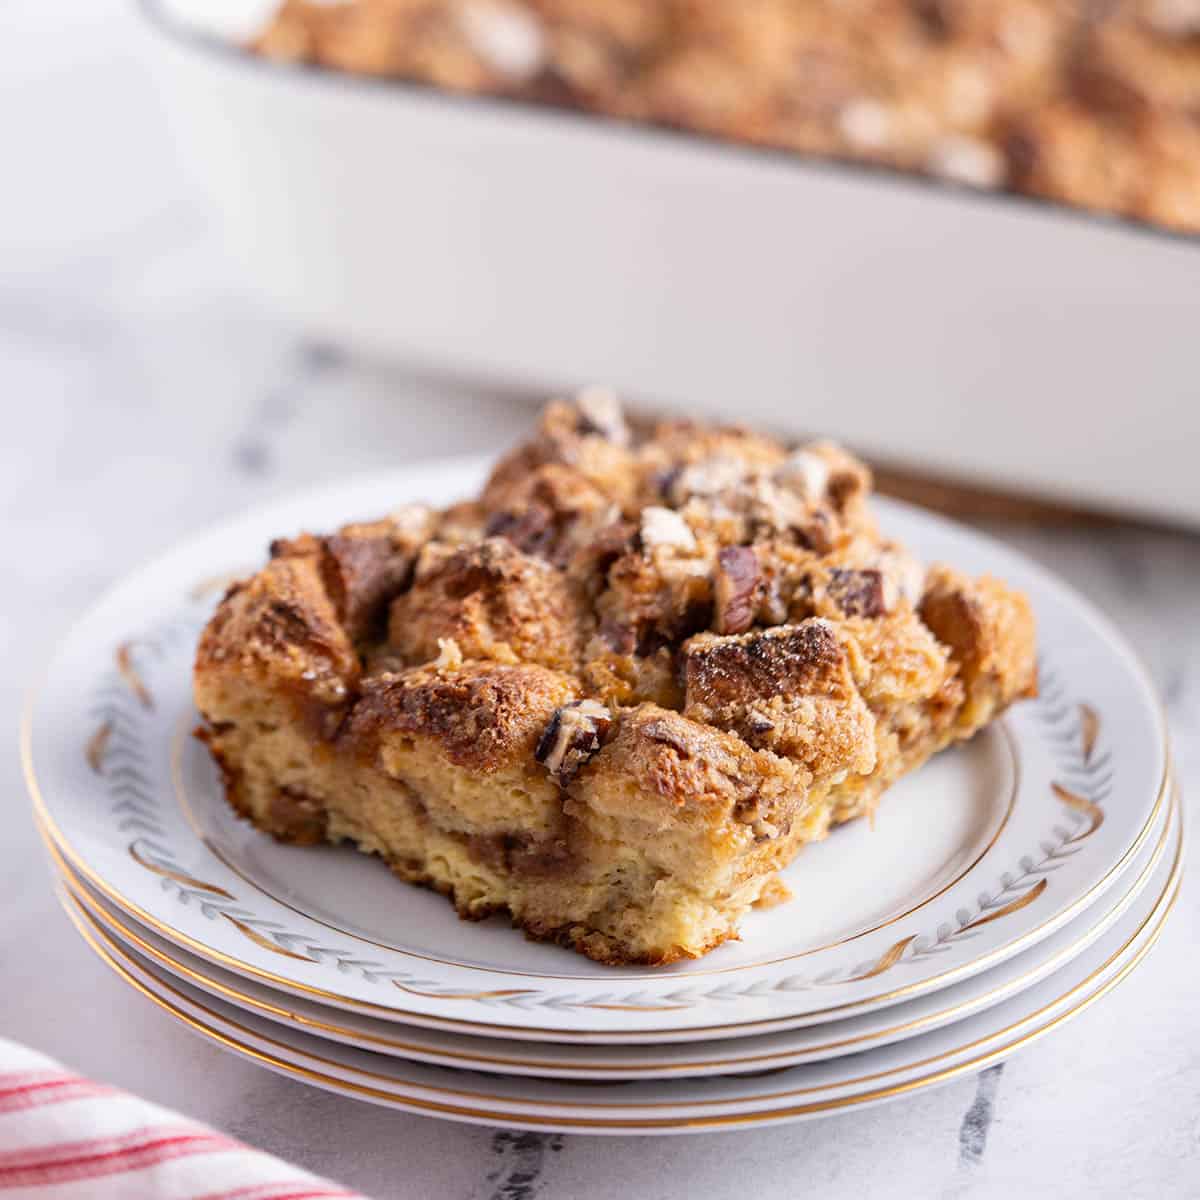 A slice of french toast casserole on a plate.